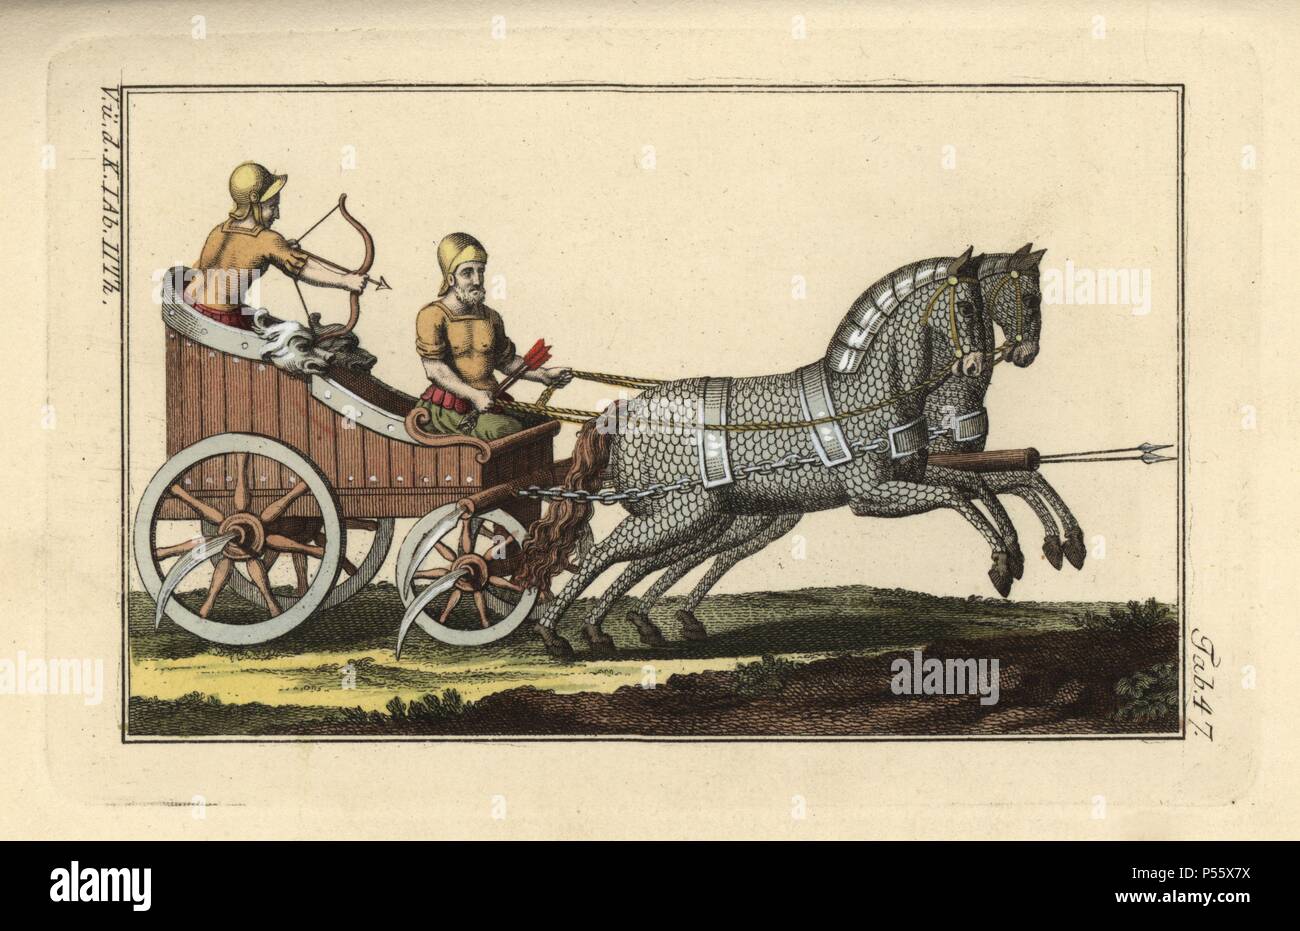 Syrian war chariot with sickles mounted on the axles, horses in full scale-armour, and archers in battledress. Handcolored copperplate engraving from Robert von Spalart's 'Historical Picture of the Costumes of the Principal People of Antiquity and of the Middle Ages' (1797). Stock Photo